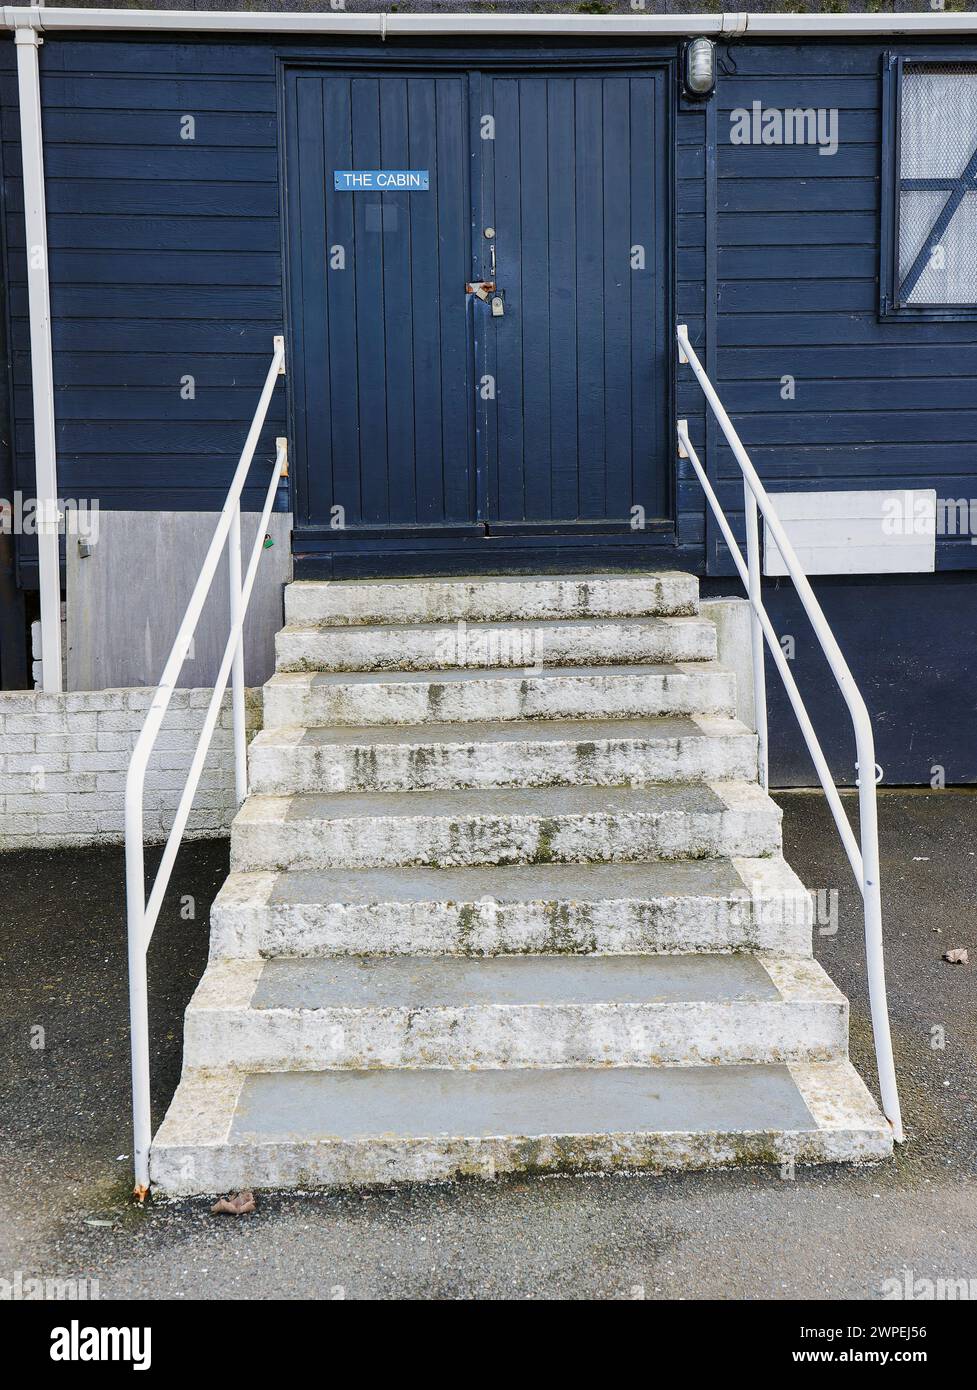 White steps with handrail leading to wooden Cabin painted blue with locked double door and sign on door saying The Cabin and window to the side of the. Stock Photo